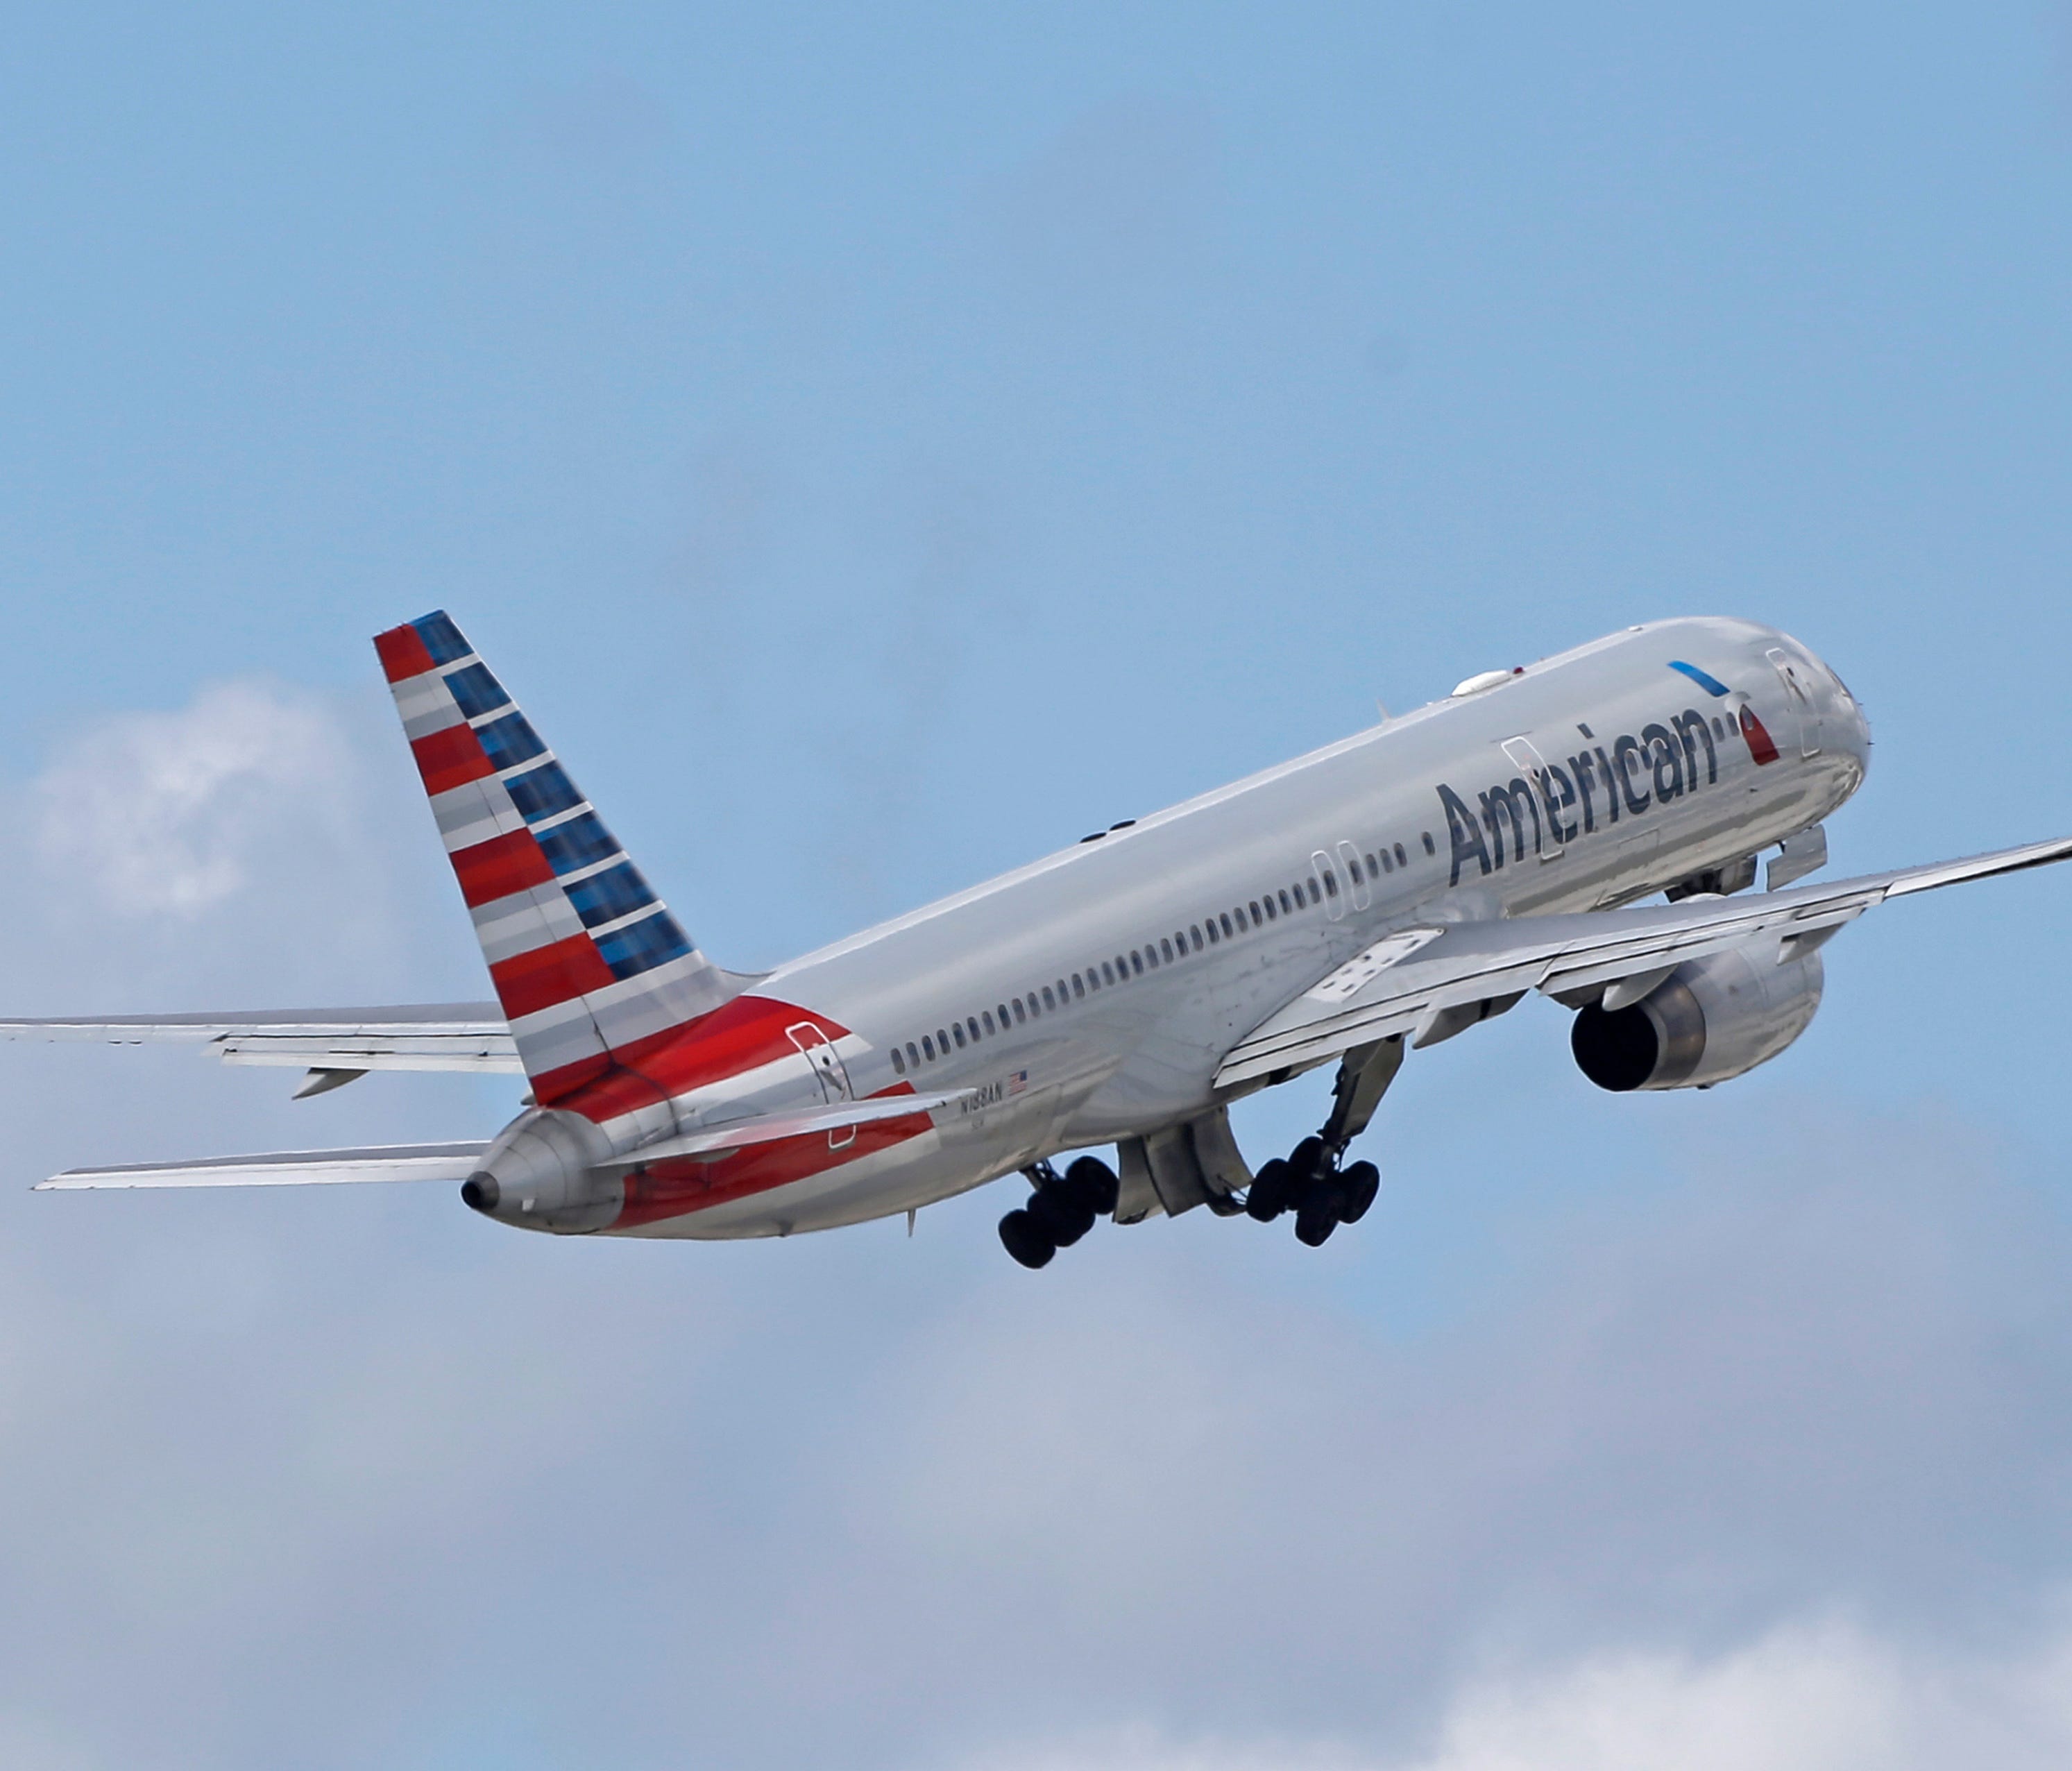 An American Airlines passenger jet takes off from Miami International Airport on June 3, 2016.